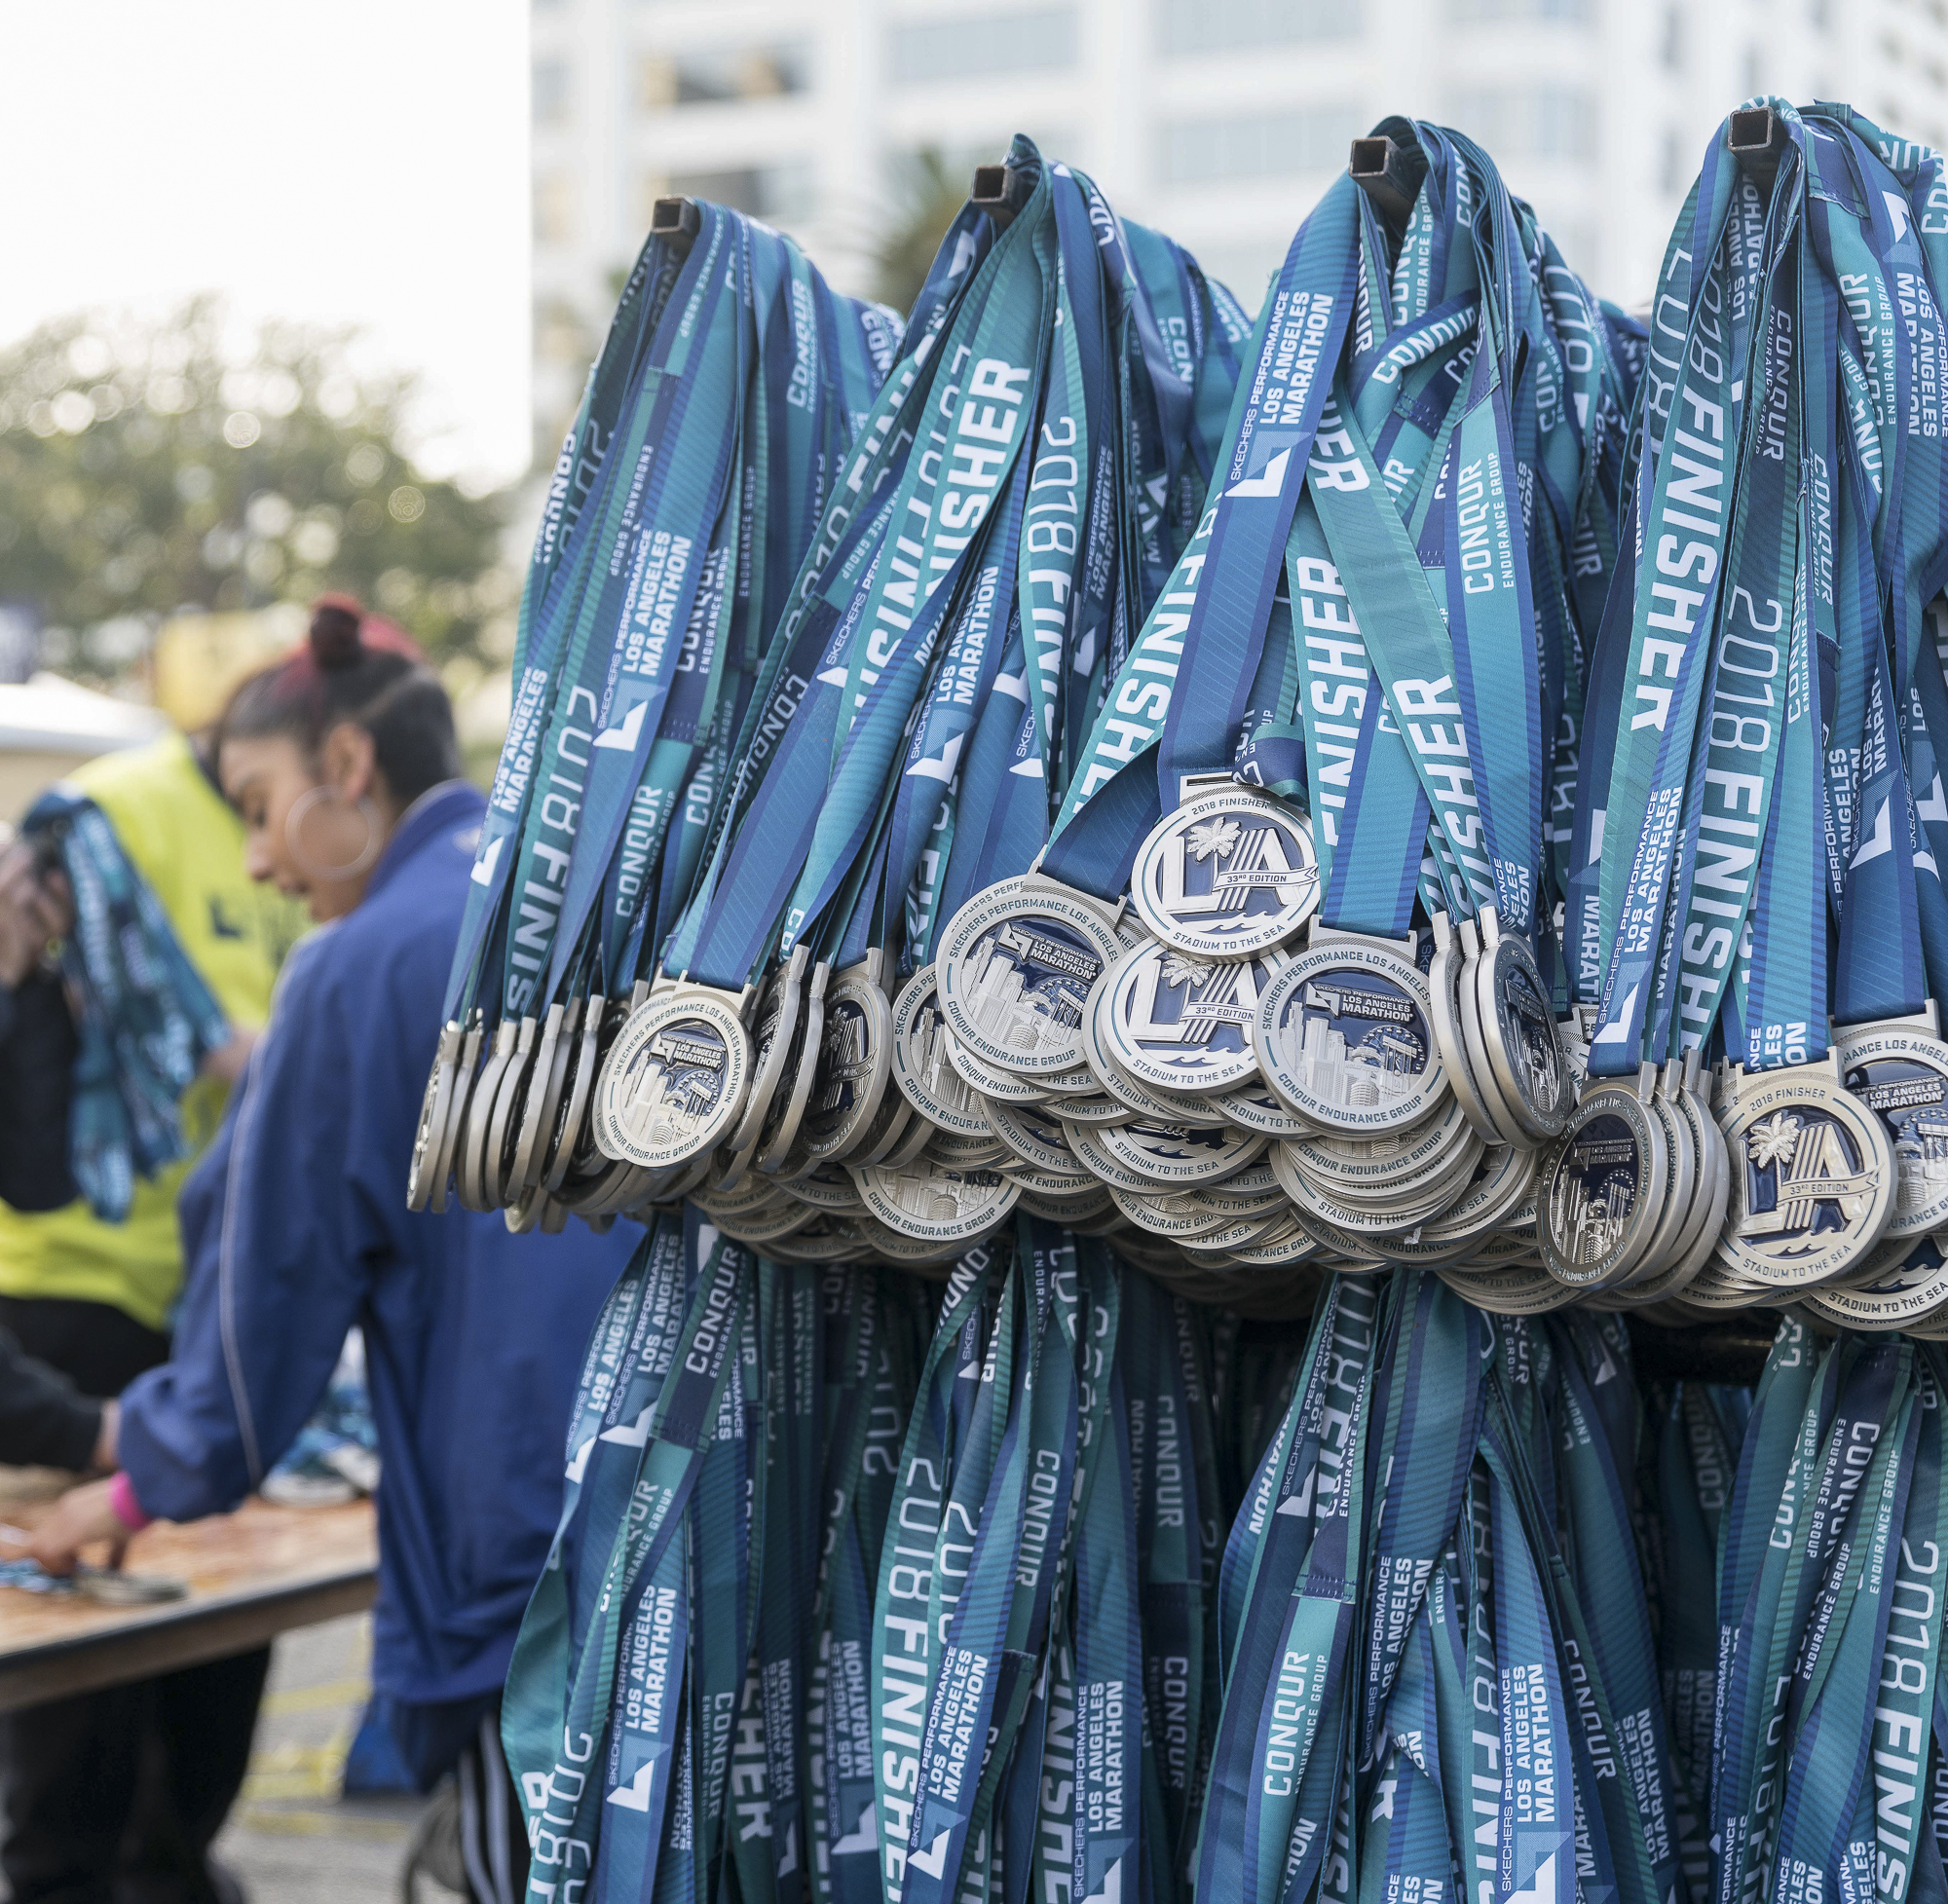  Los Angeles Marathon volunteer, Karen Arriola, unboxes and hangs medals in Santa Monica, California on Sunday, March 18, 2018. It is estimated that 24,000 people participated in the marathon this year. (Photo by: Helena Sung). 